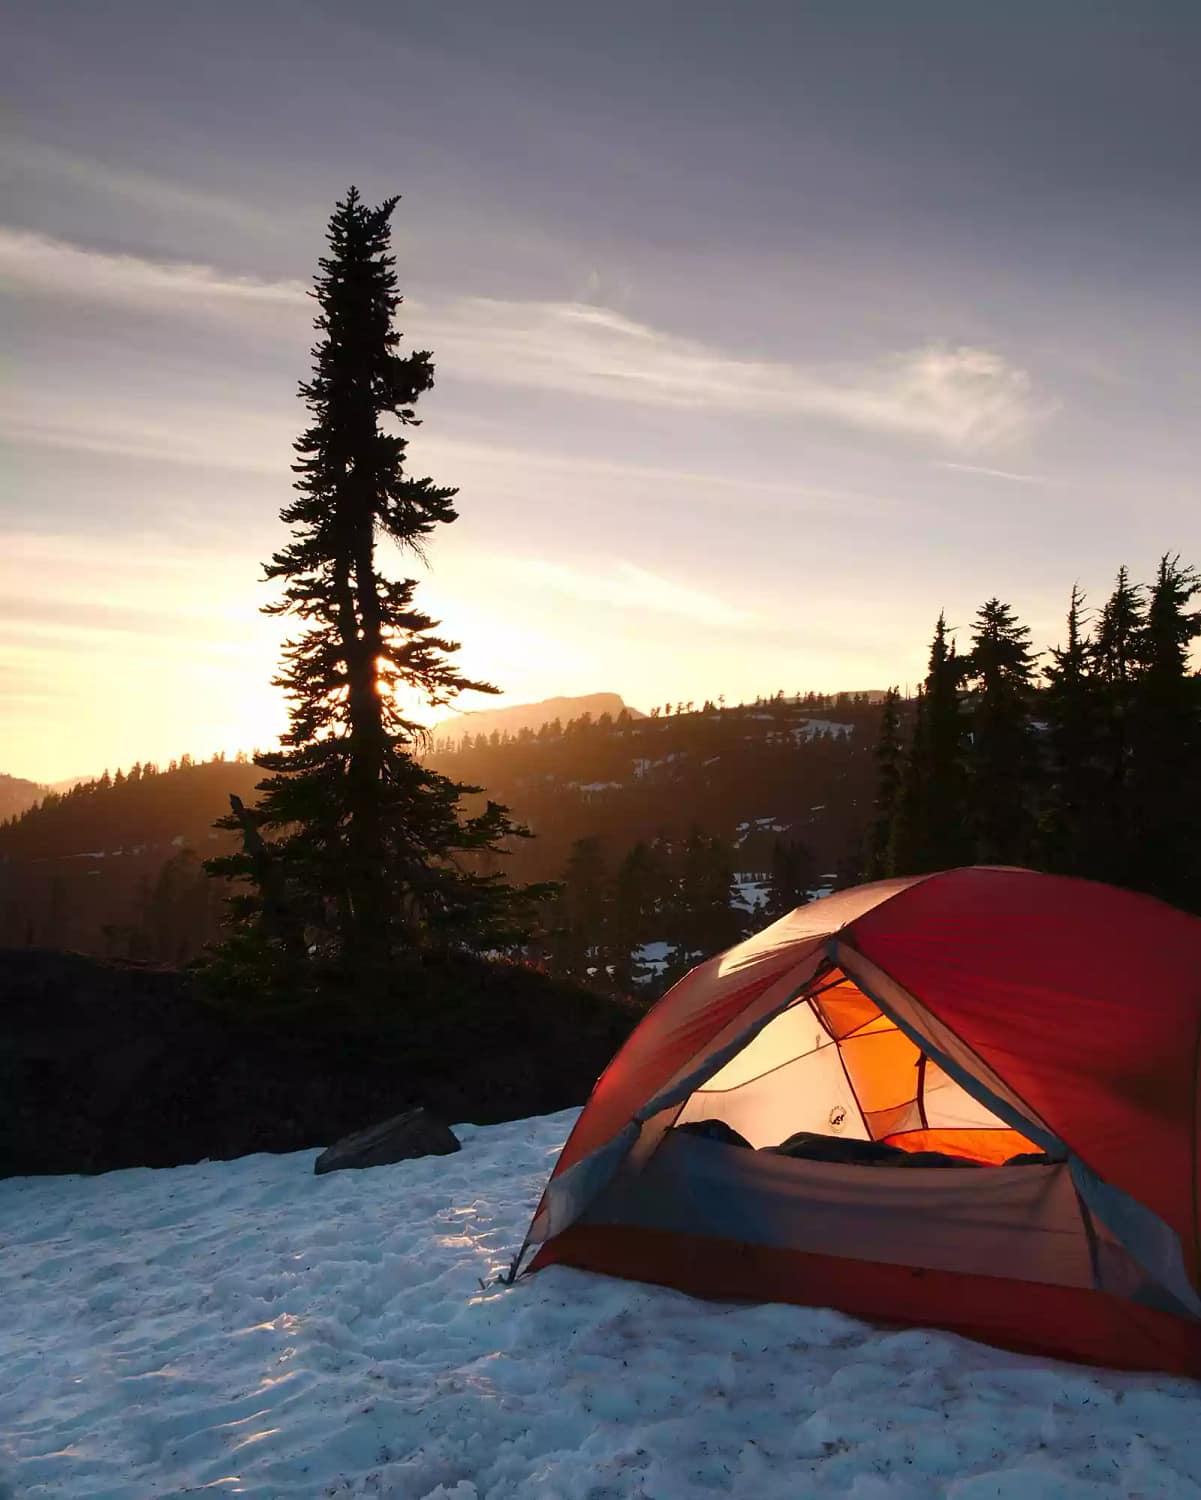 An orange dome tent pitched on a snowy spot for winter camping near a pine tree. The sun is setting behind a slope in the background.